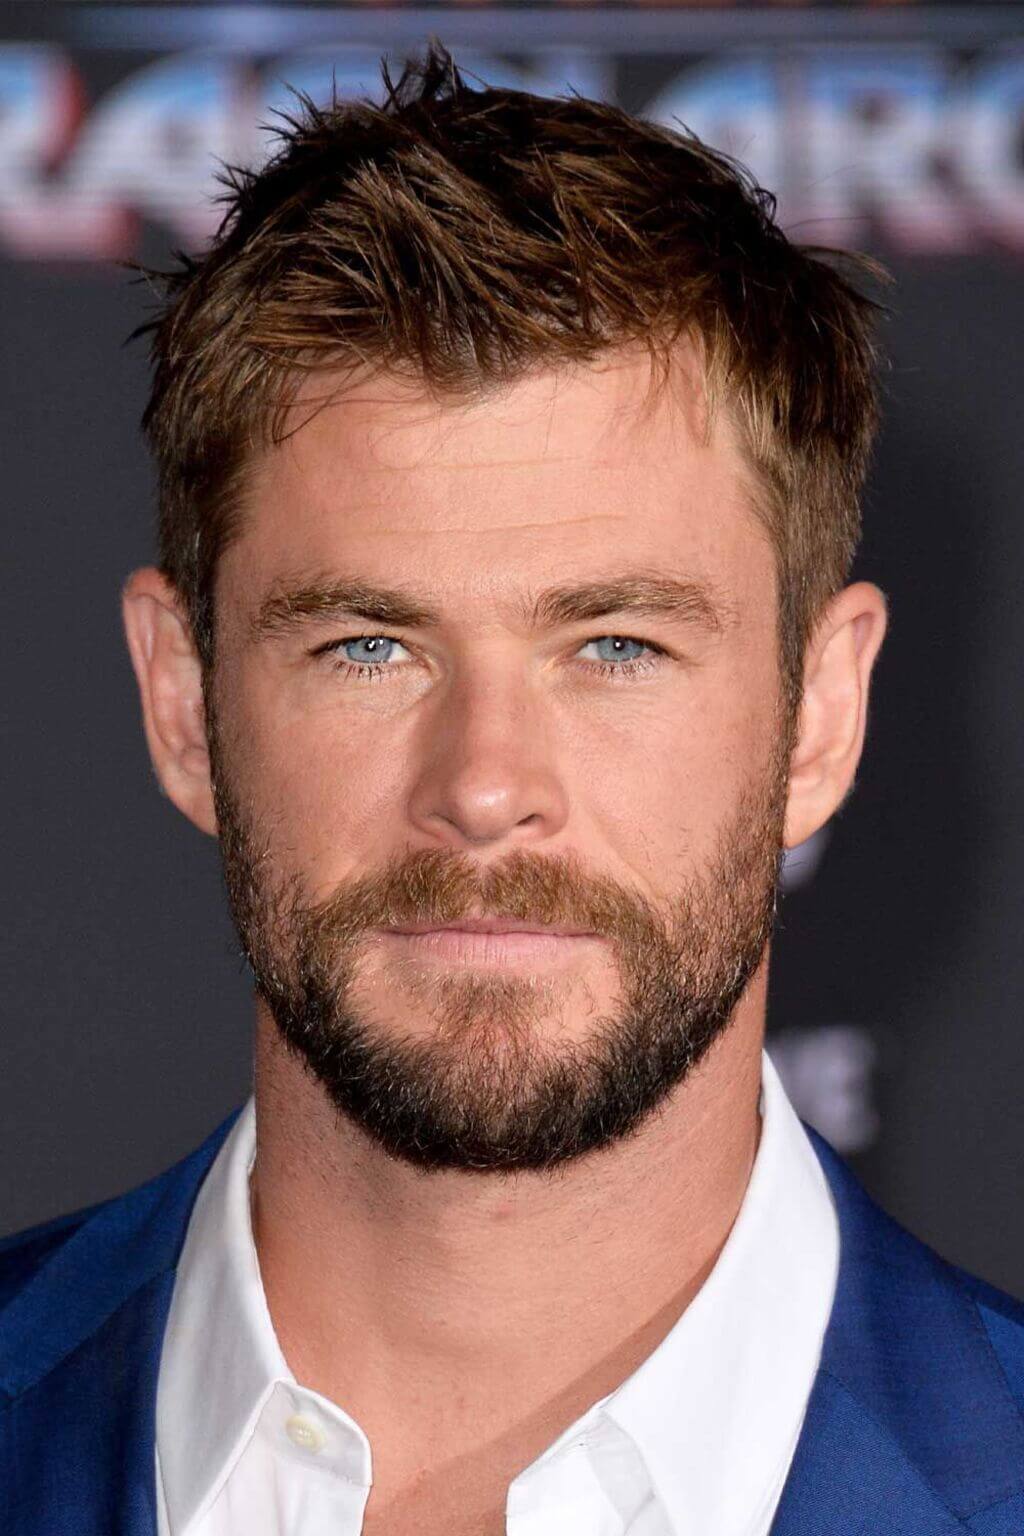 Short Trimmed Hairstyle Of Chris Hemsworth